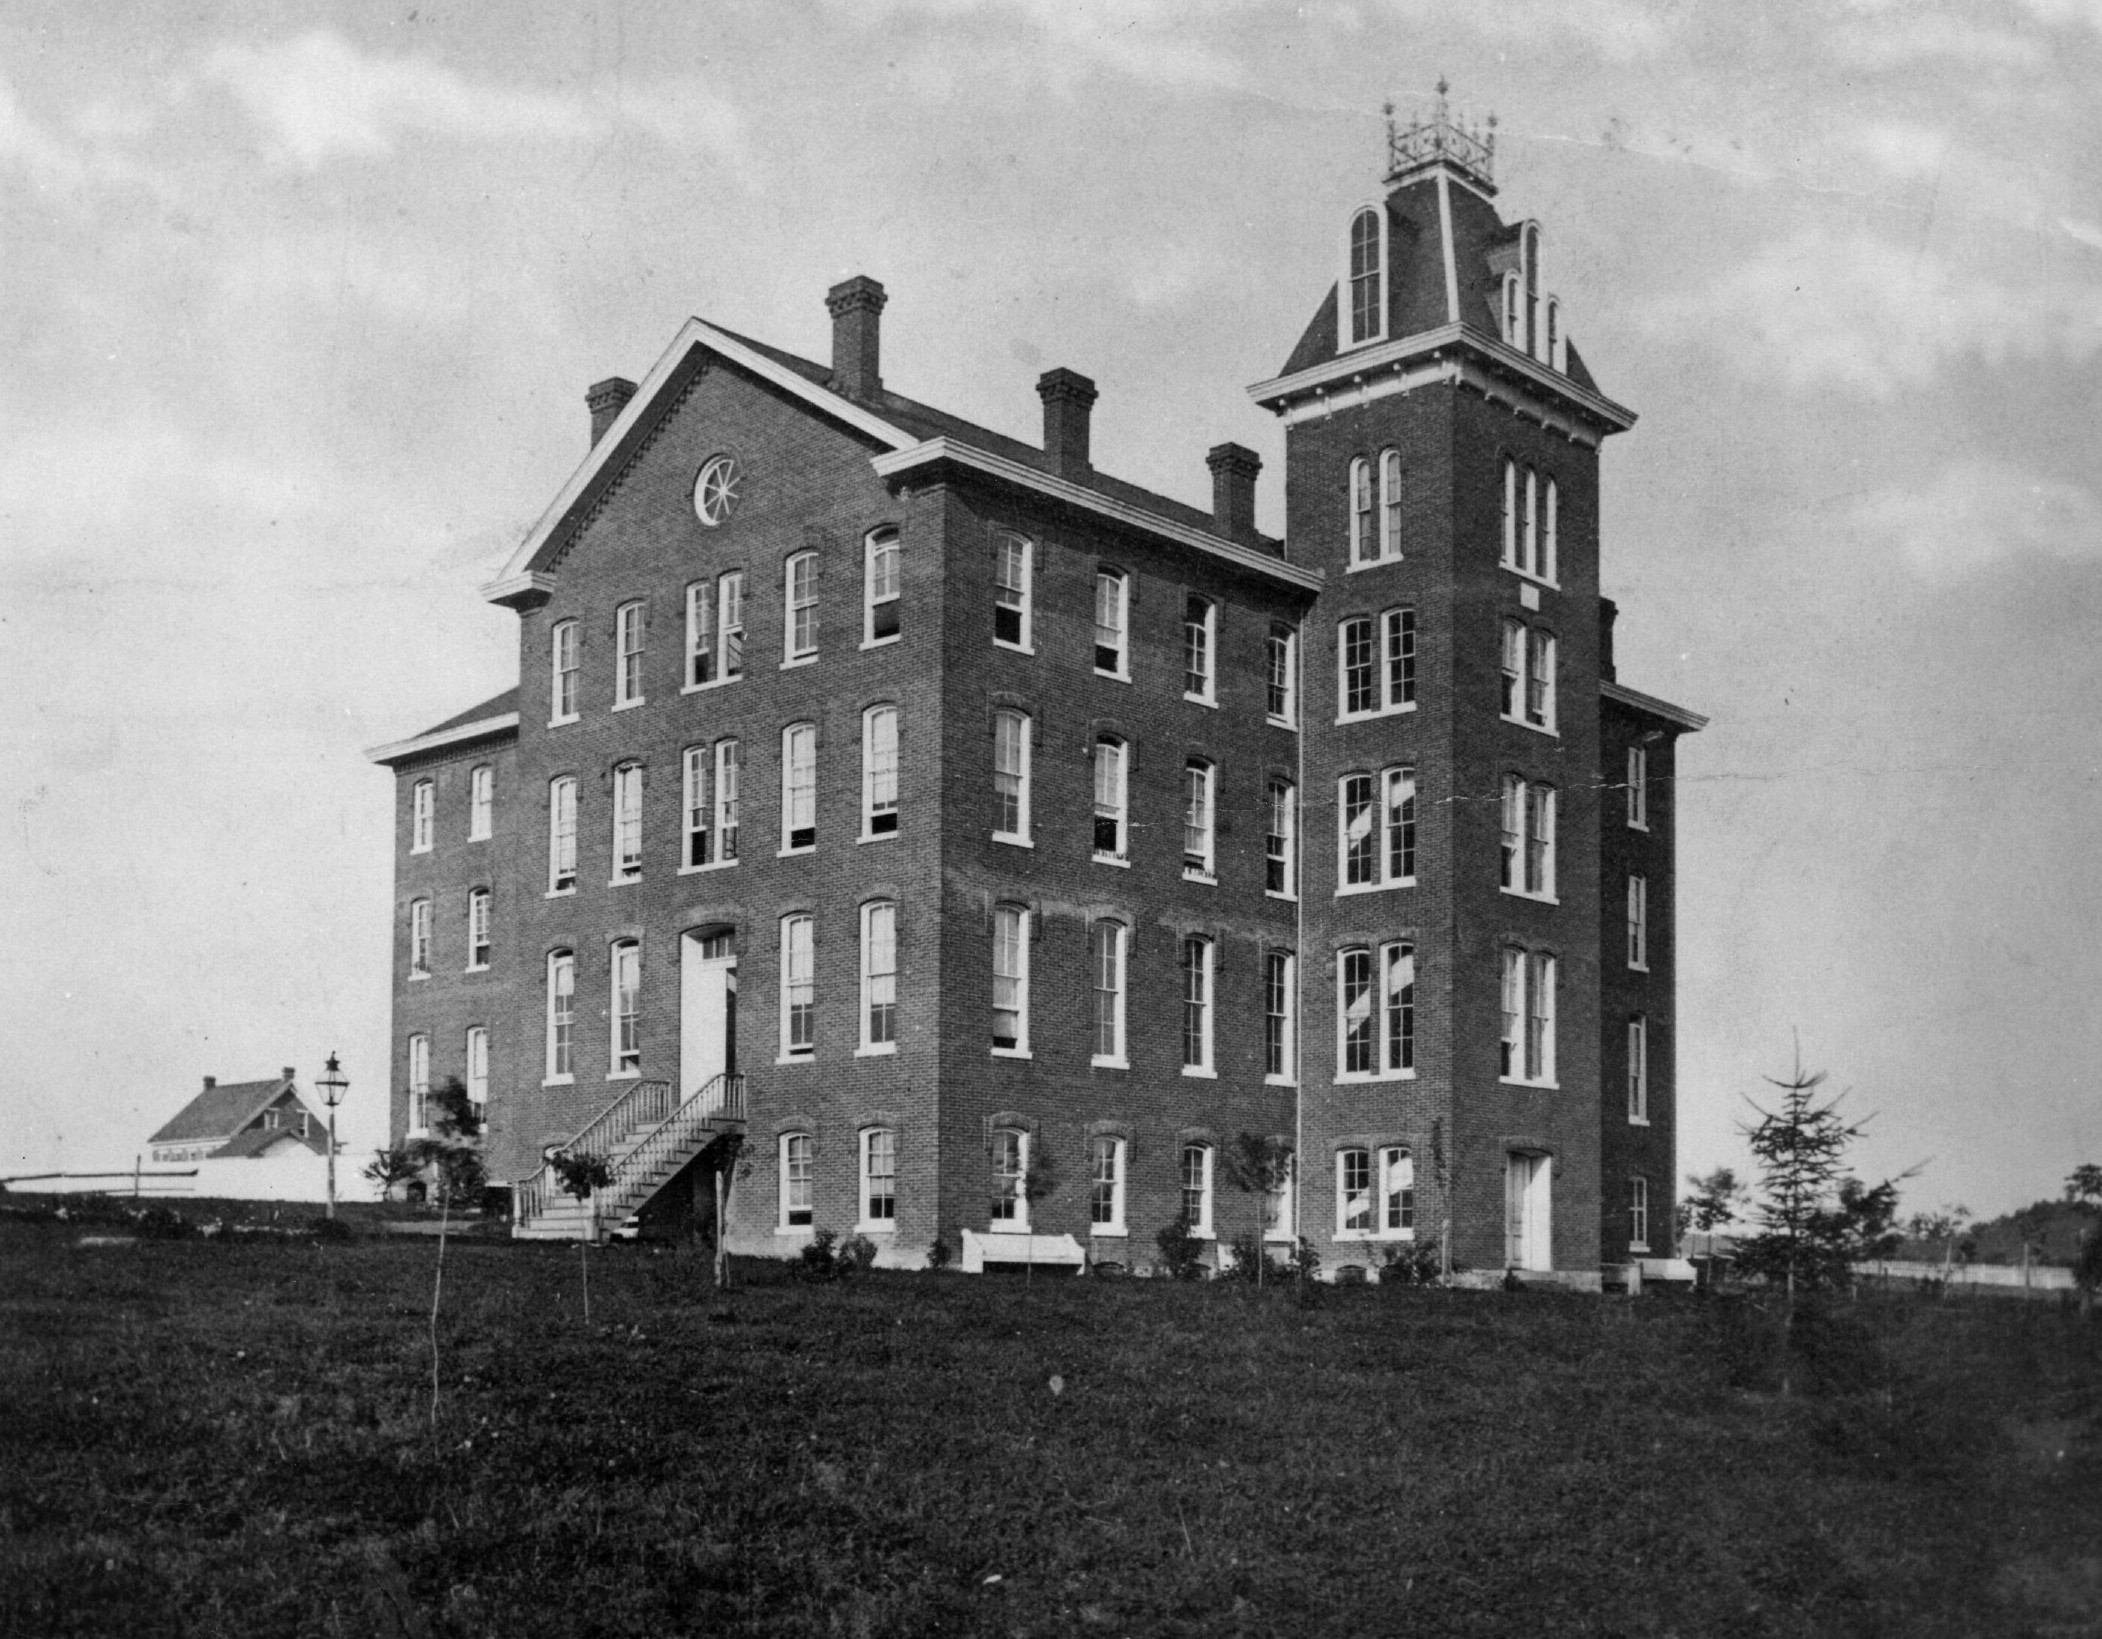 The original Founders Hall, a year after its construction